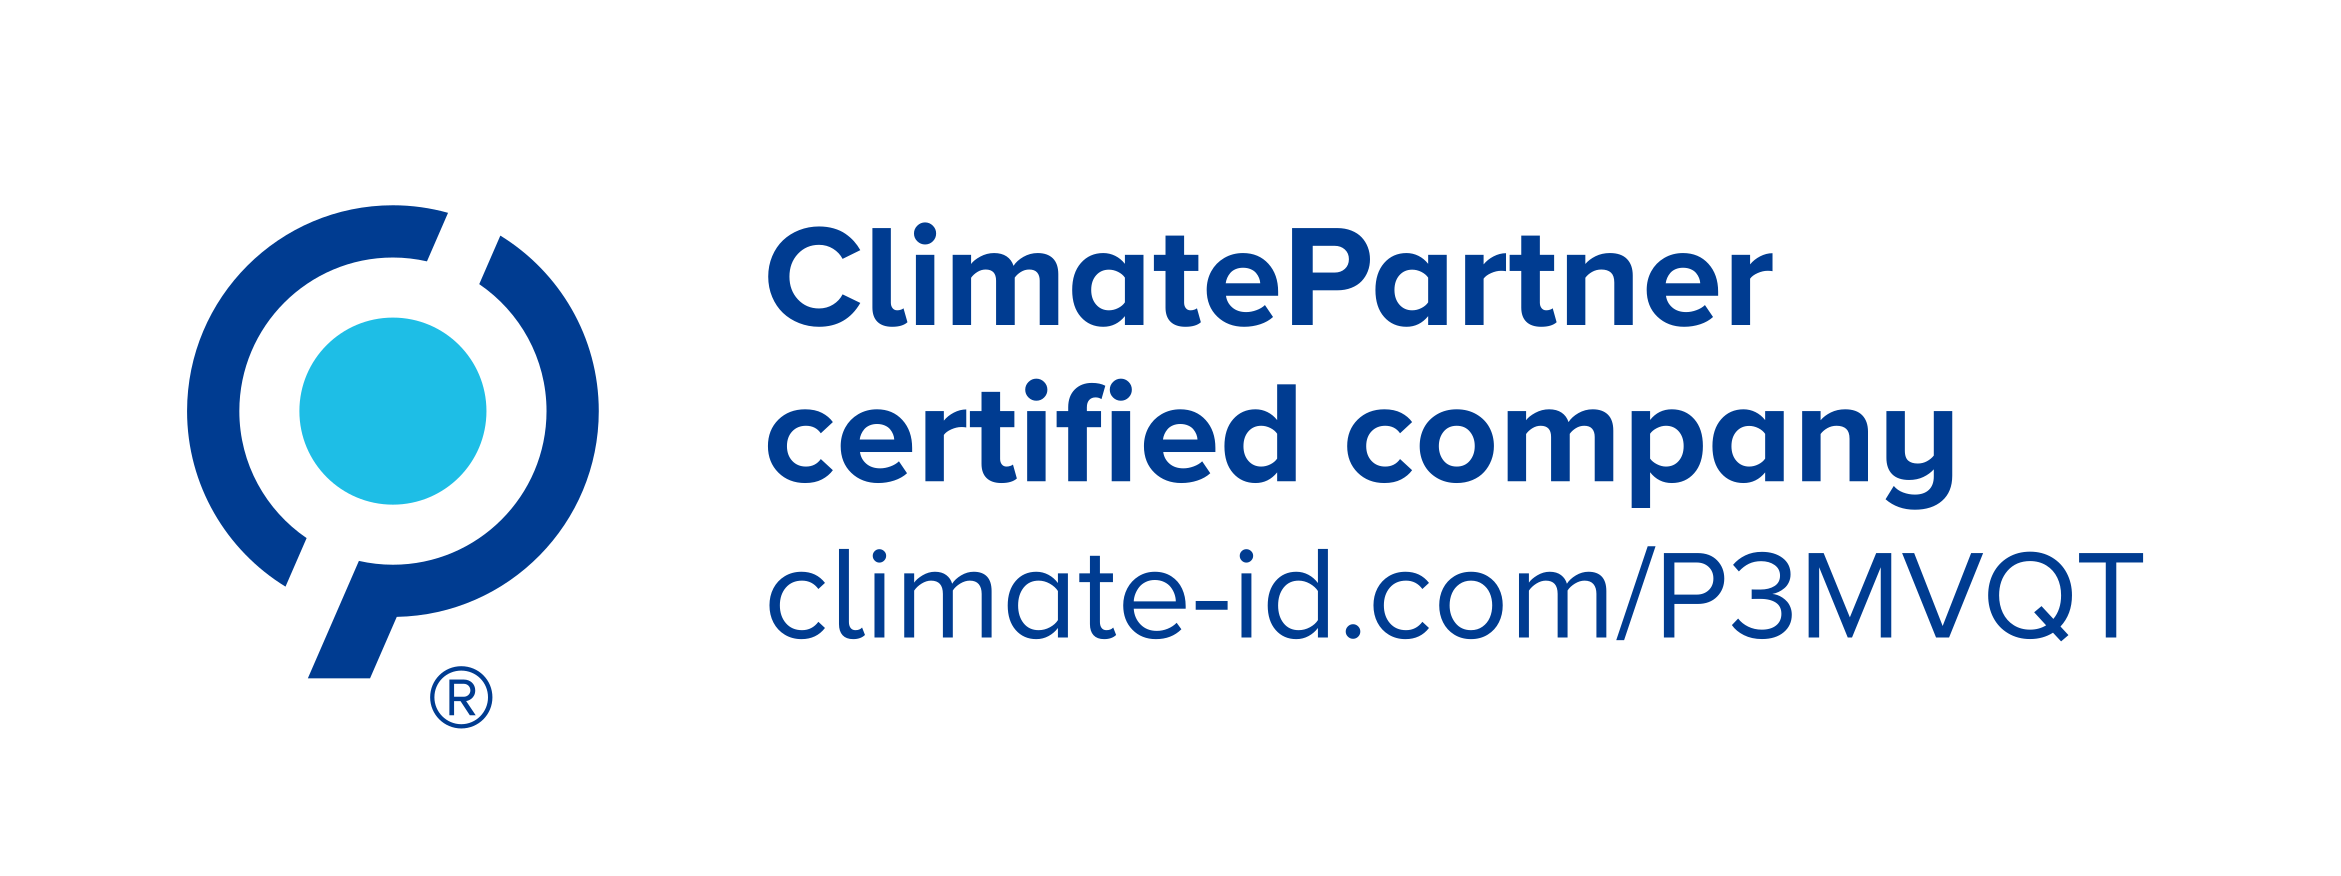 Logo Climate Partner certified company.